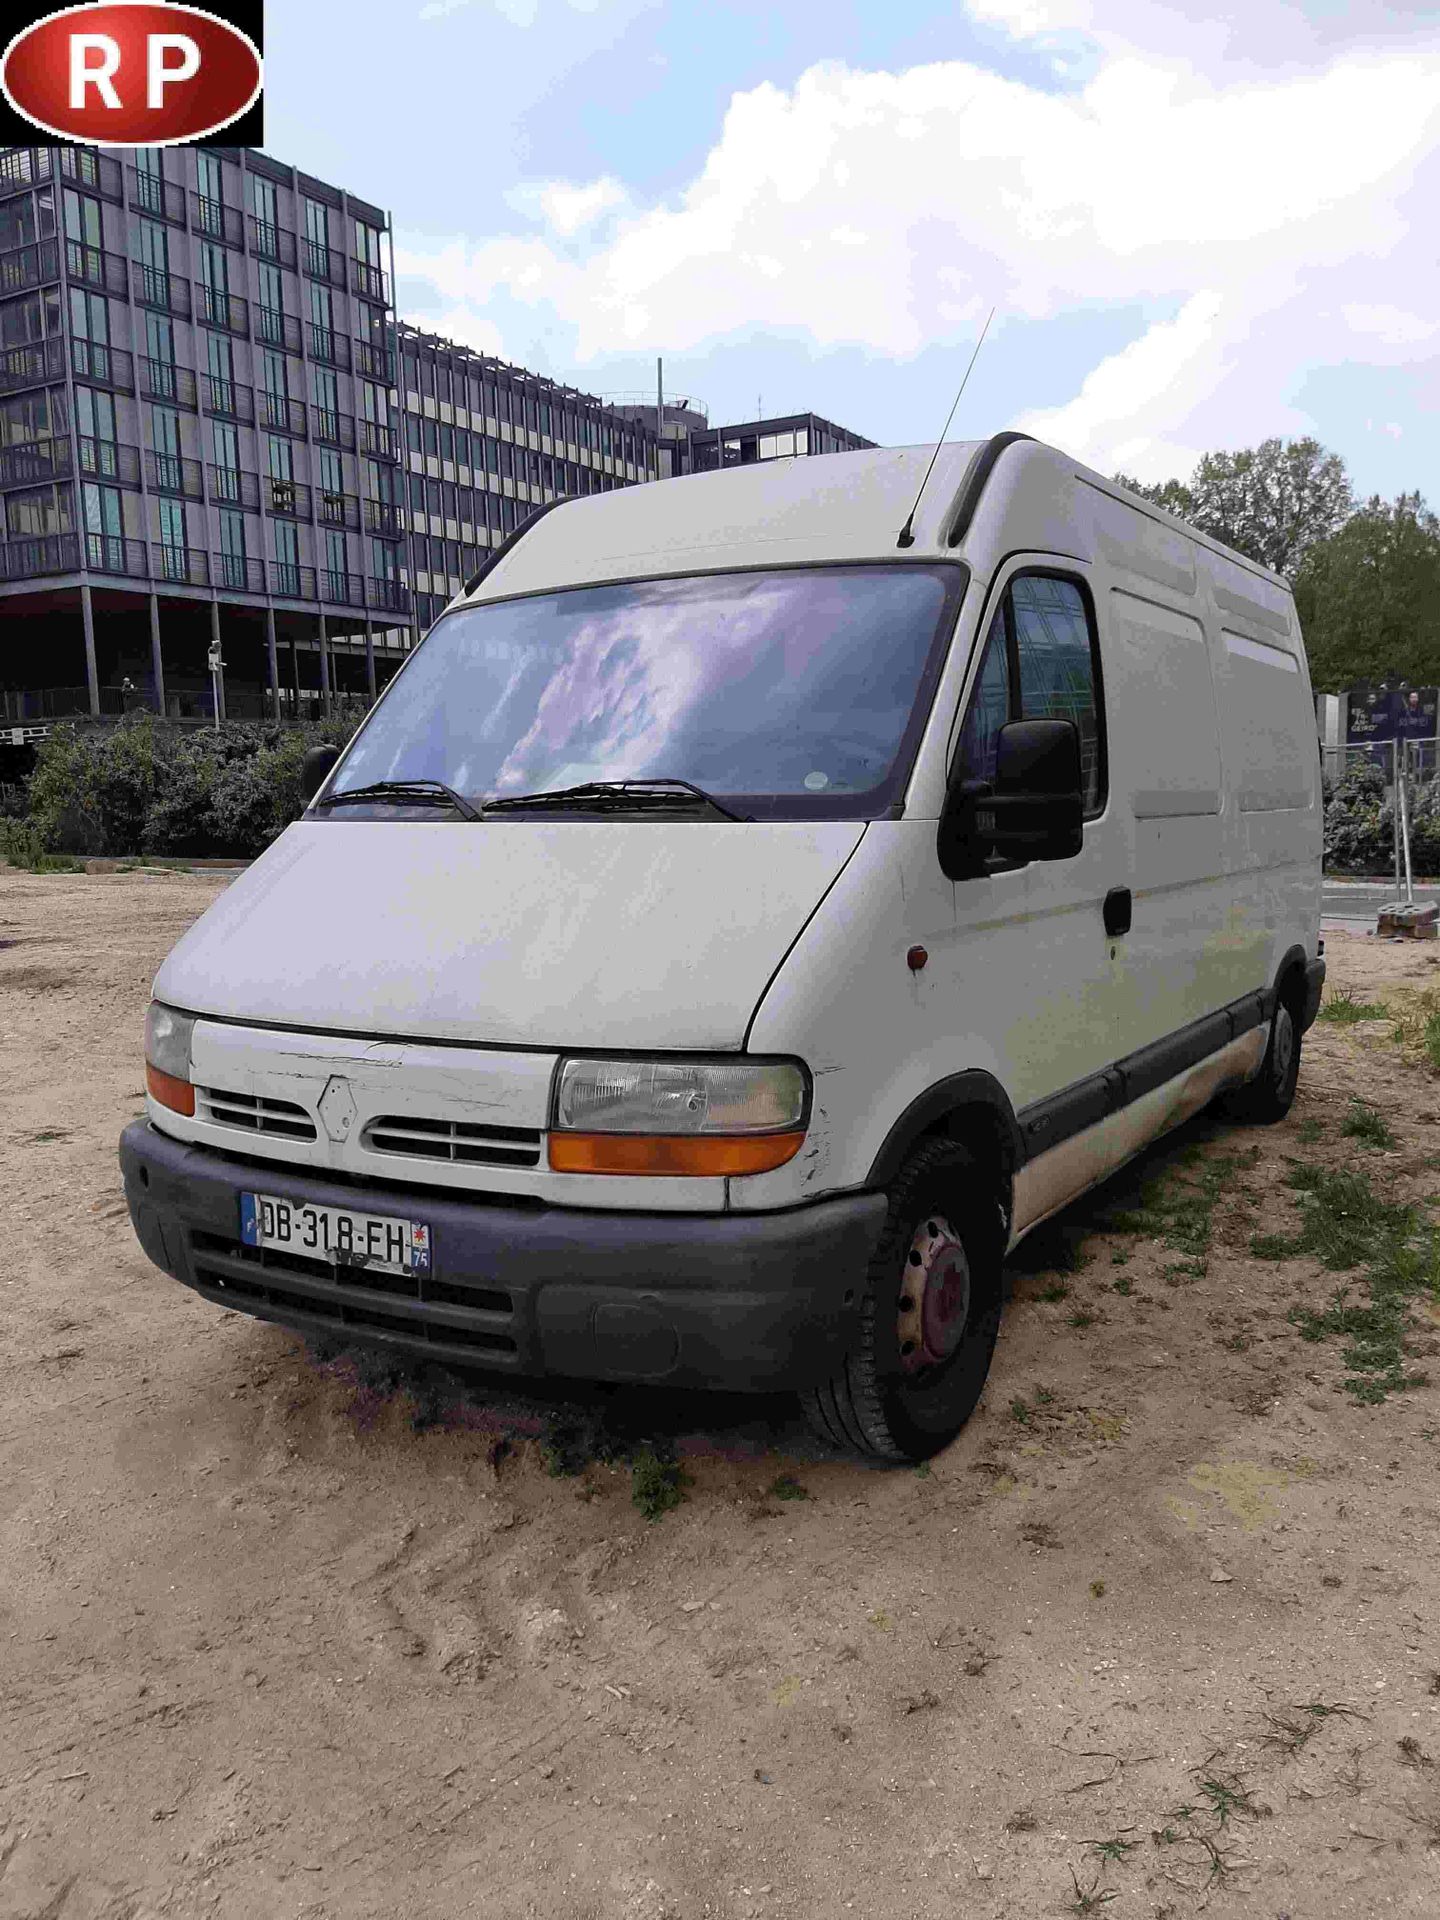 Null [RP][ACI] RENAULT Master 2.5 dCi 115, Gazole, imm. DB-318-EH, type FDCUH5, &hellip;